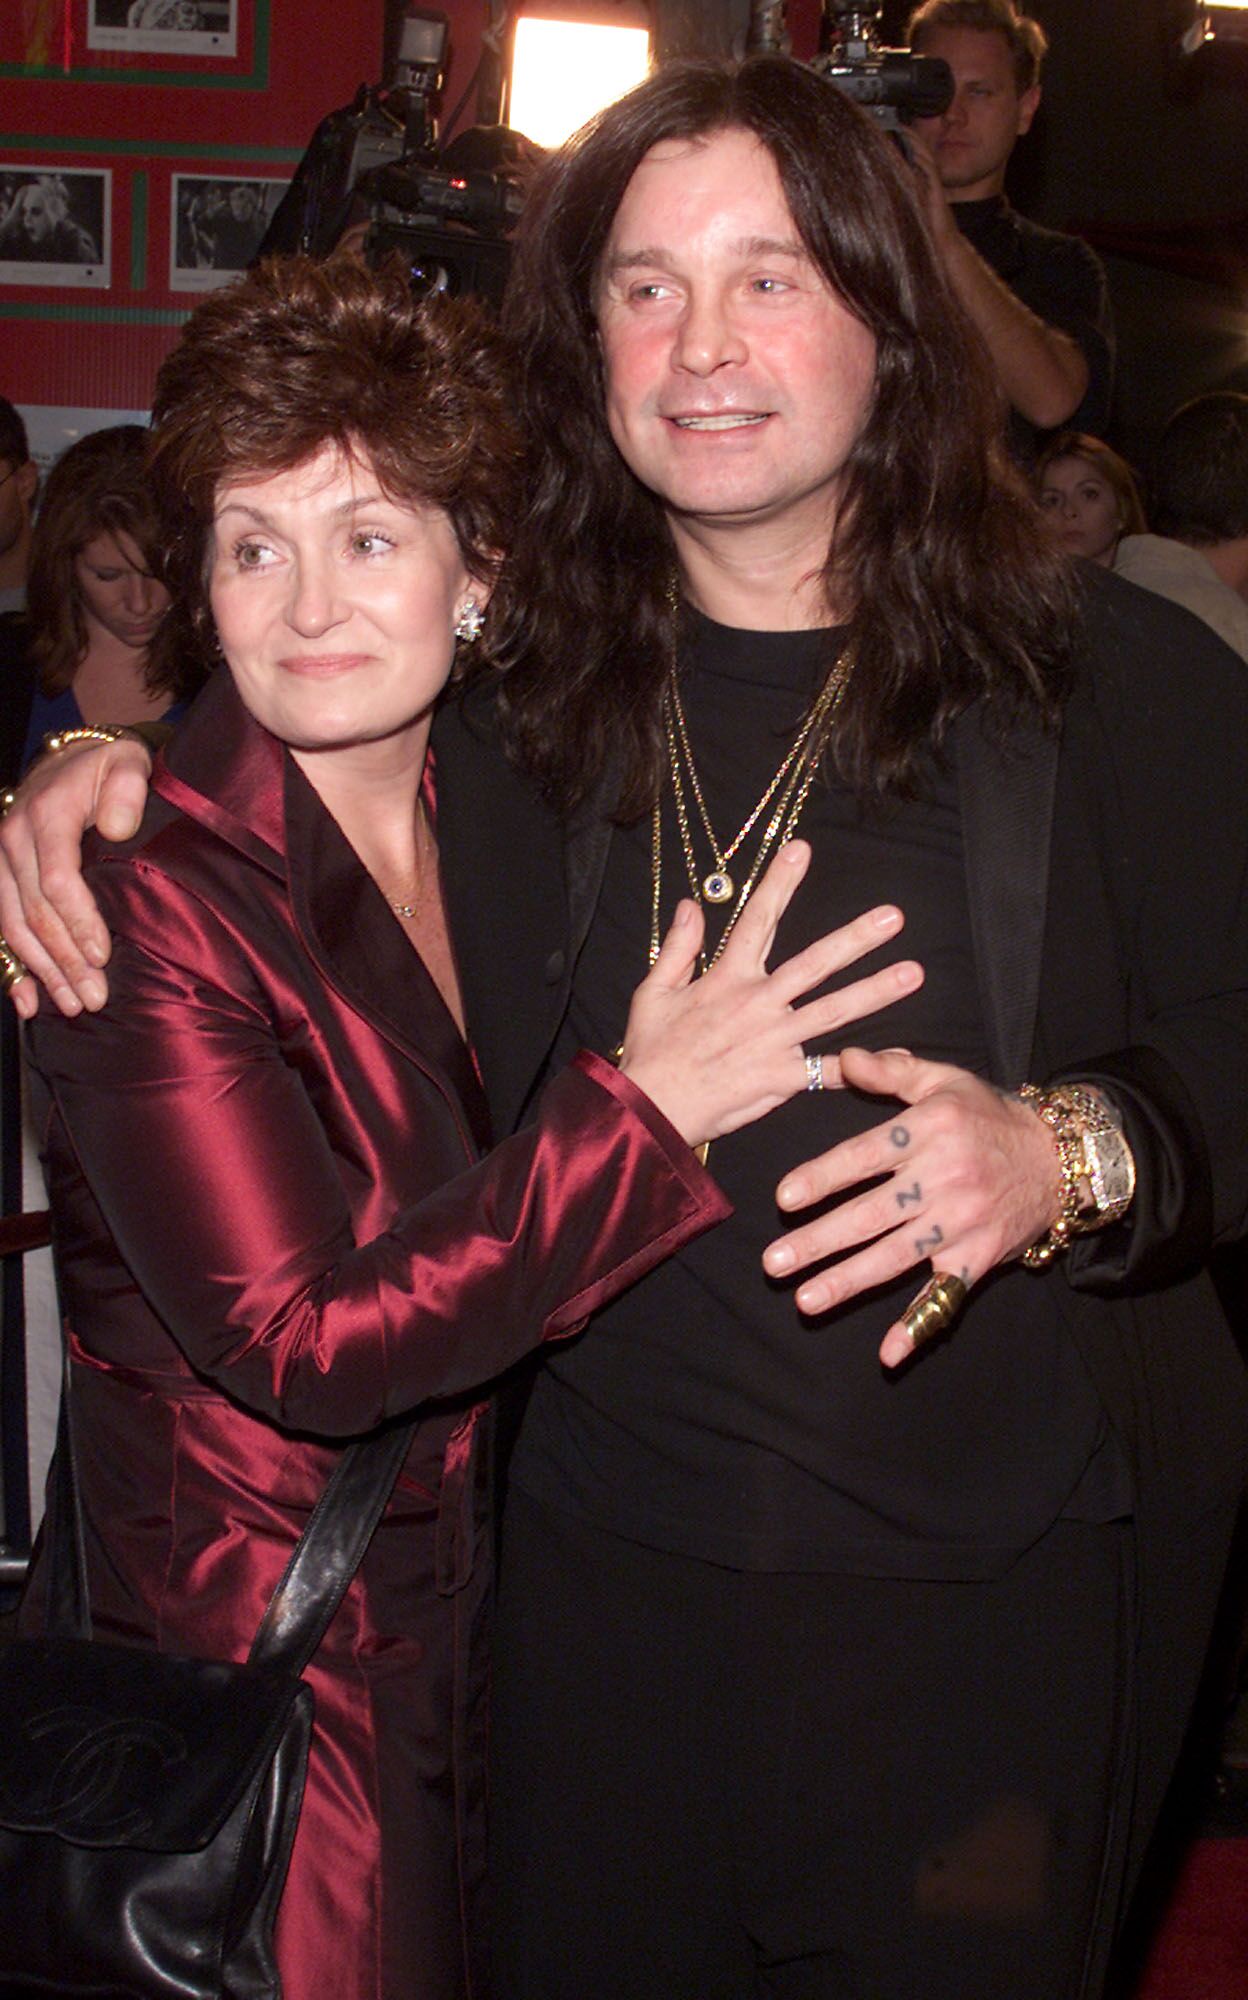 Ozzy Osbourne and his wife Sharon at the premiere of 'Little Nicky' in Los Angeles in 2000 | Photo: Getty Images